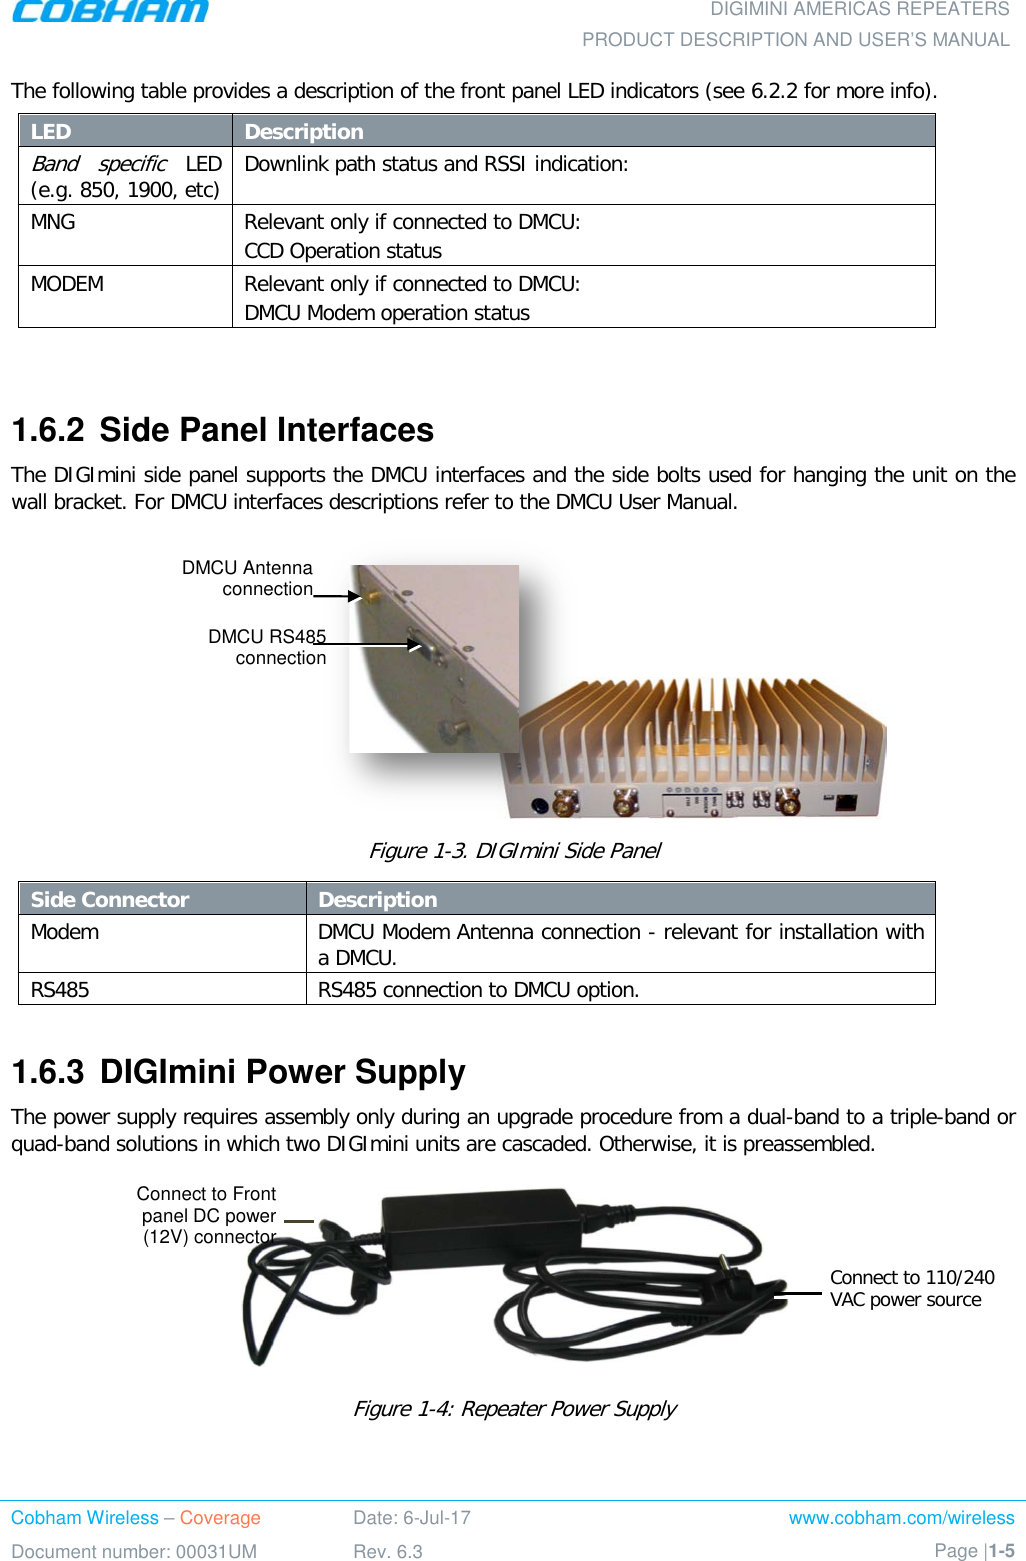  DIGIMINI AMERICAS REPEATERS PRODUCT DESCRIPTION AND USER’S MANUAL Cobham Wireless – Coverage Date: 6-Jul-17 www.cobham.com/wireless Document number: 00031UM Rev. 6.3 Page |1-5  The following table provides a description of the front panel LED indicators (see  6.2.2 for more info). LED Description  Band specific LED (e.g. 850, 1900, etc) Downlink path status and RSSI indication: MNG Relevant only if connected to DMCU: CCD Operation status MODEM Relevant only if connected to DMCU: DMCU Modem operation status   1.6.2  Side Panel Interfaces The DIGImini side panel supports the DMCU interfaces and the side bolts used for hanging the unit on the wall bracket. For DMCU interfaces descriptions refer to the DMCU User Manual.                                                                           Figure  1-3. DIGImini Side Panel Side Connector Description  Modem DMCU Modem Antenna connection - relevant for installation with a DMCU. RS485 RS485 connection to DMCU option.  1.6.3  DIGImini Power Supply The power supply requires assembly only during an upgrade procedure from a dual-band to a triple-band or quad-band solutions in which two DIGImini units are cascaded. Otherwise, it is preassembled.    Figure  1-4: Repeater Power Supply Connect to 110/240 VAC power source Connect to Front panel DC power (12V) connector DMCU Antenna connection DMCU RS485 connection  